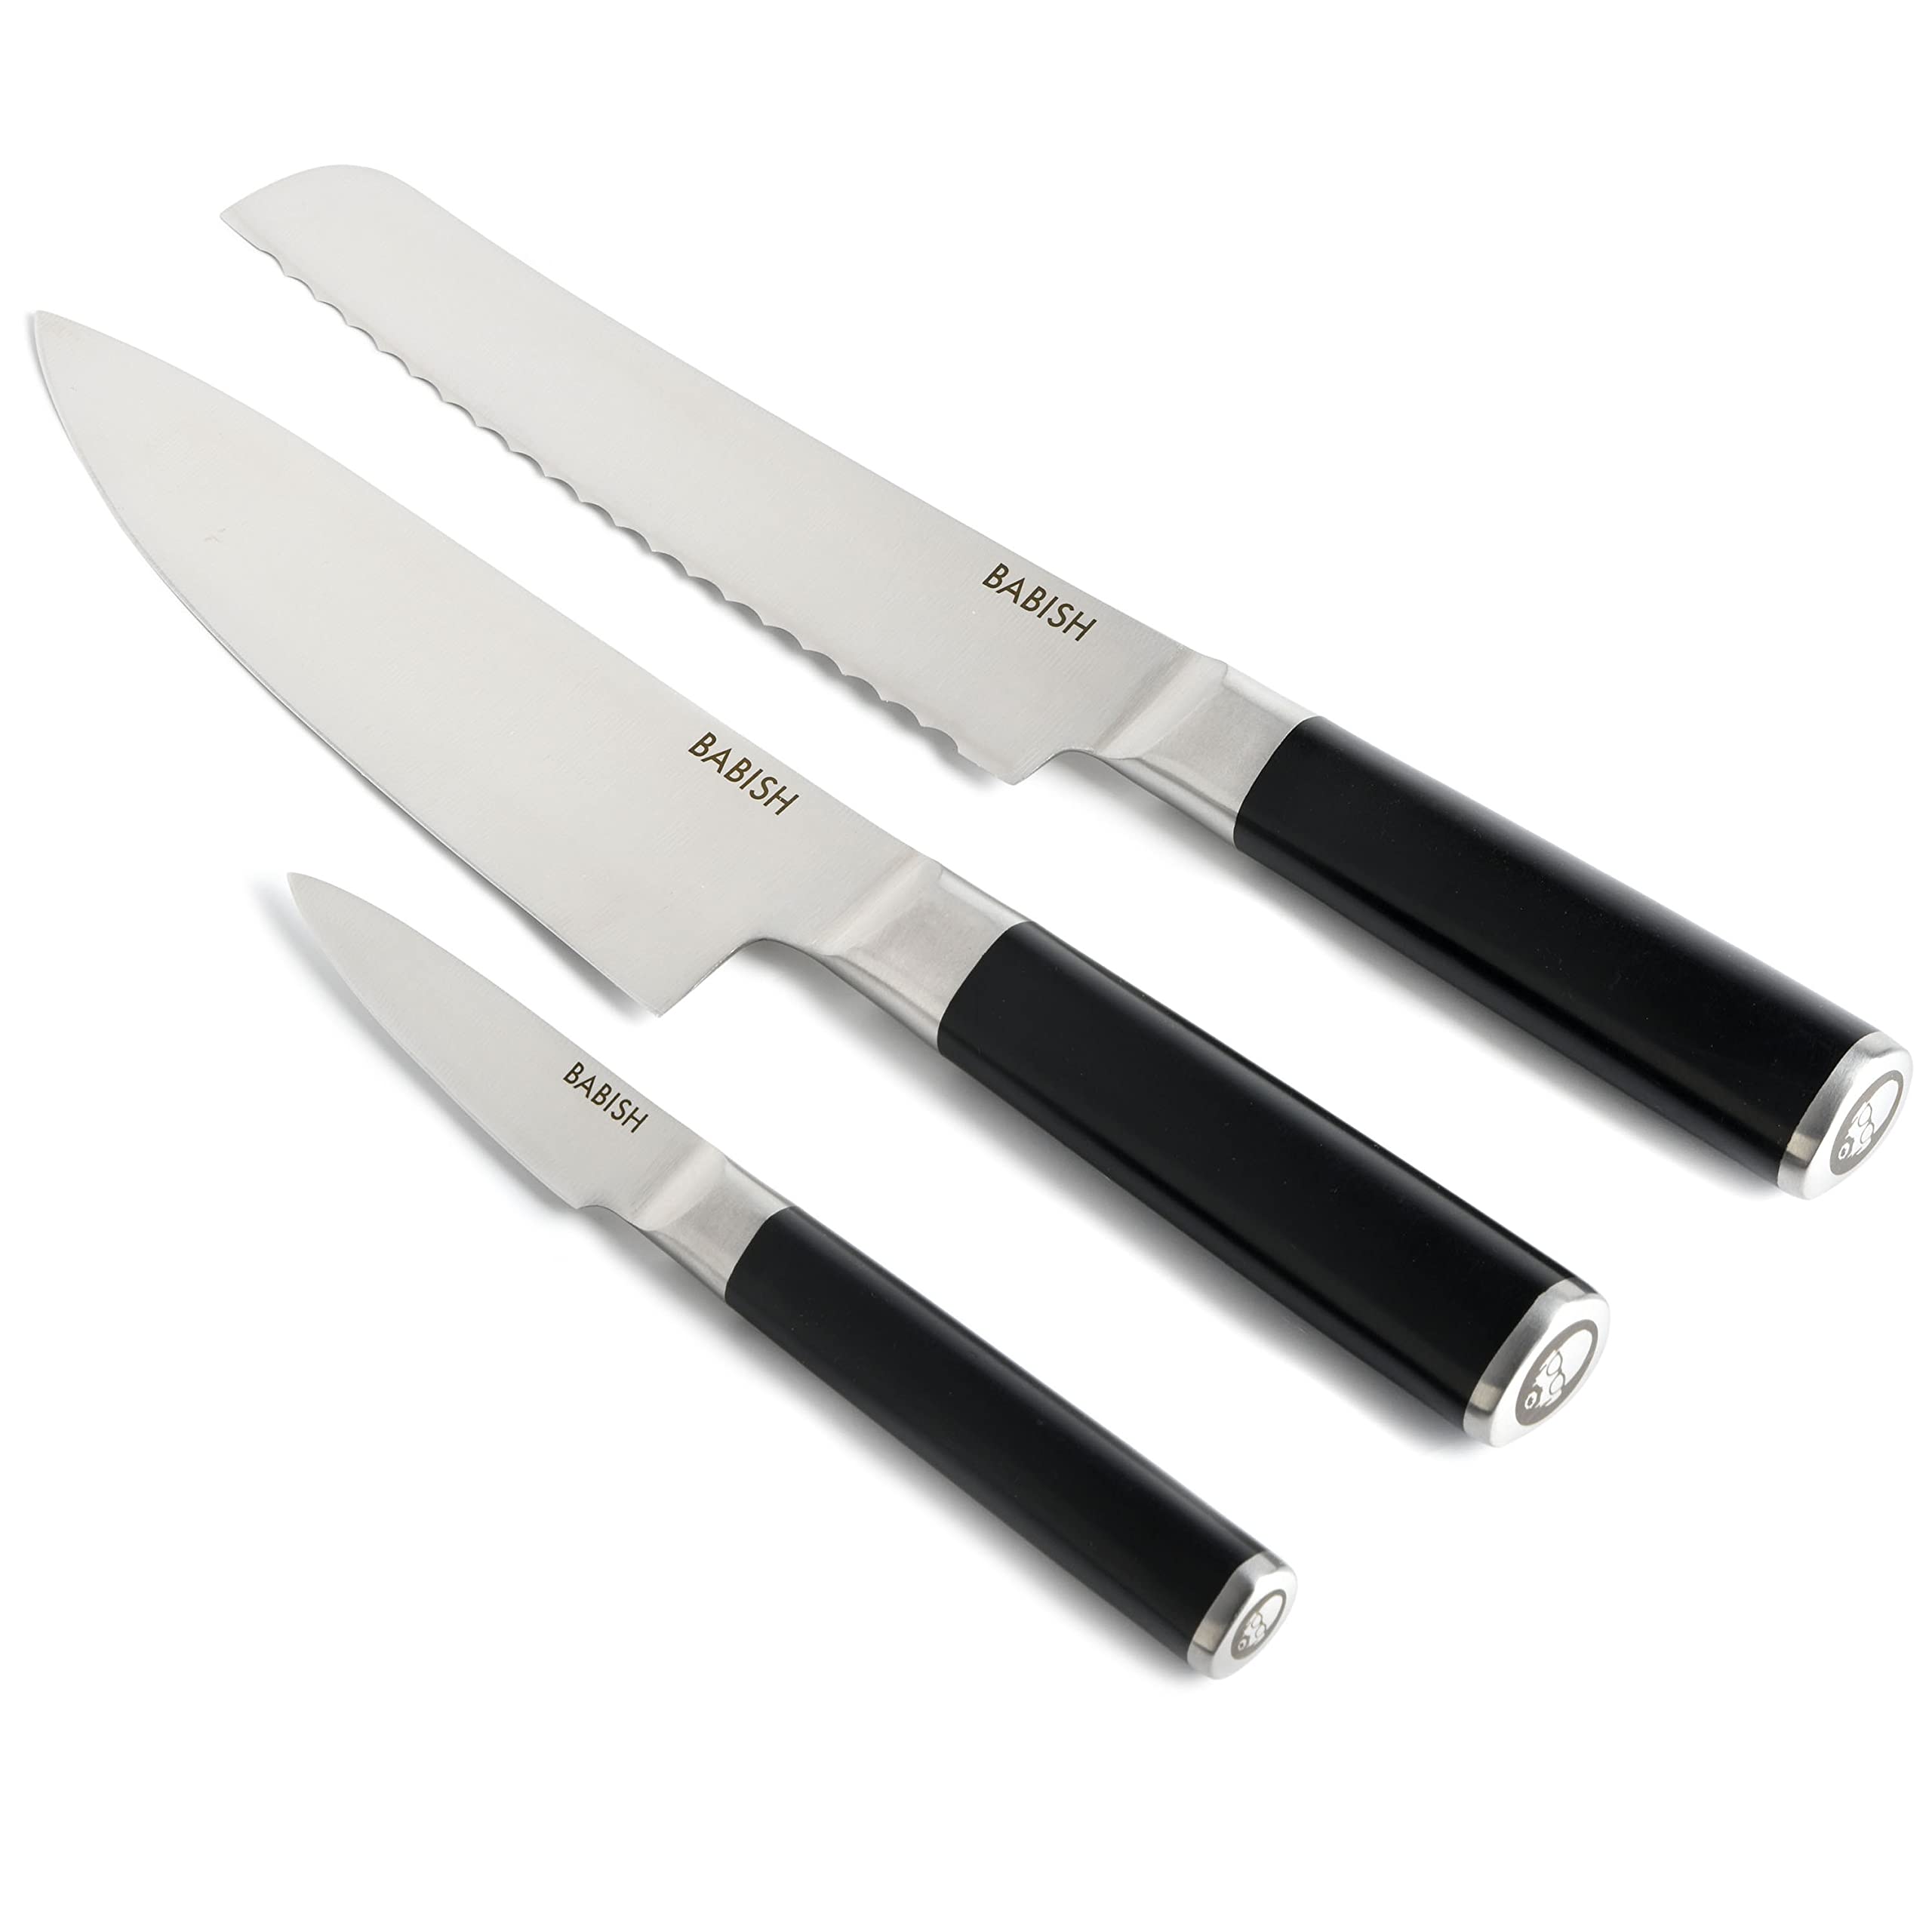 Babish German High-Carbon 1.4116 Steel Cutlery, 3-Piece w/Knife Roll & 12” & 9” Locking Kitchen Tong Set, Stainless Steel